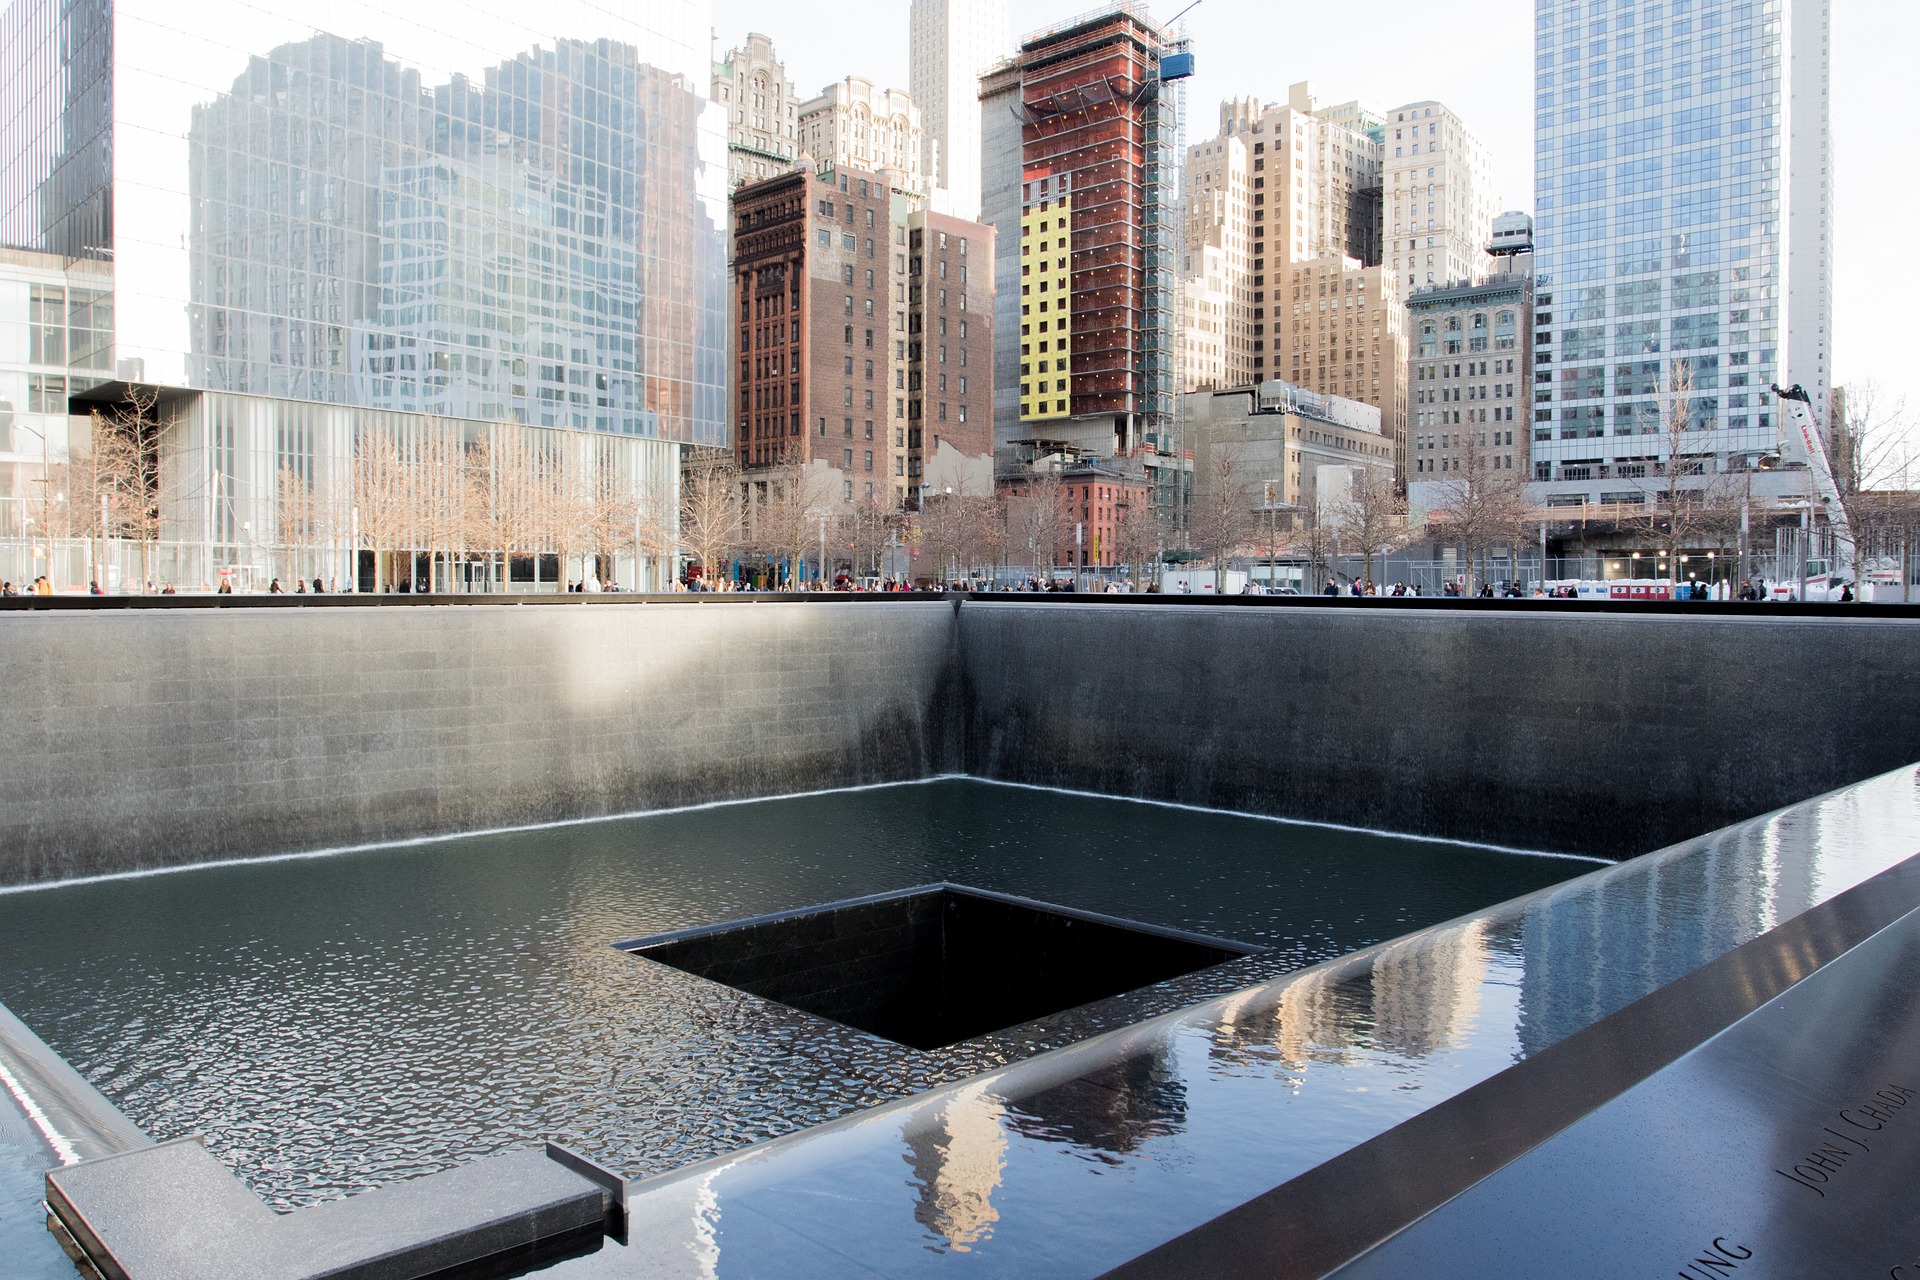 9 11 memorial 22. Can Germany tax my GI Bill / post 9/11 benefits?